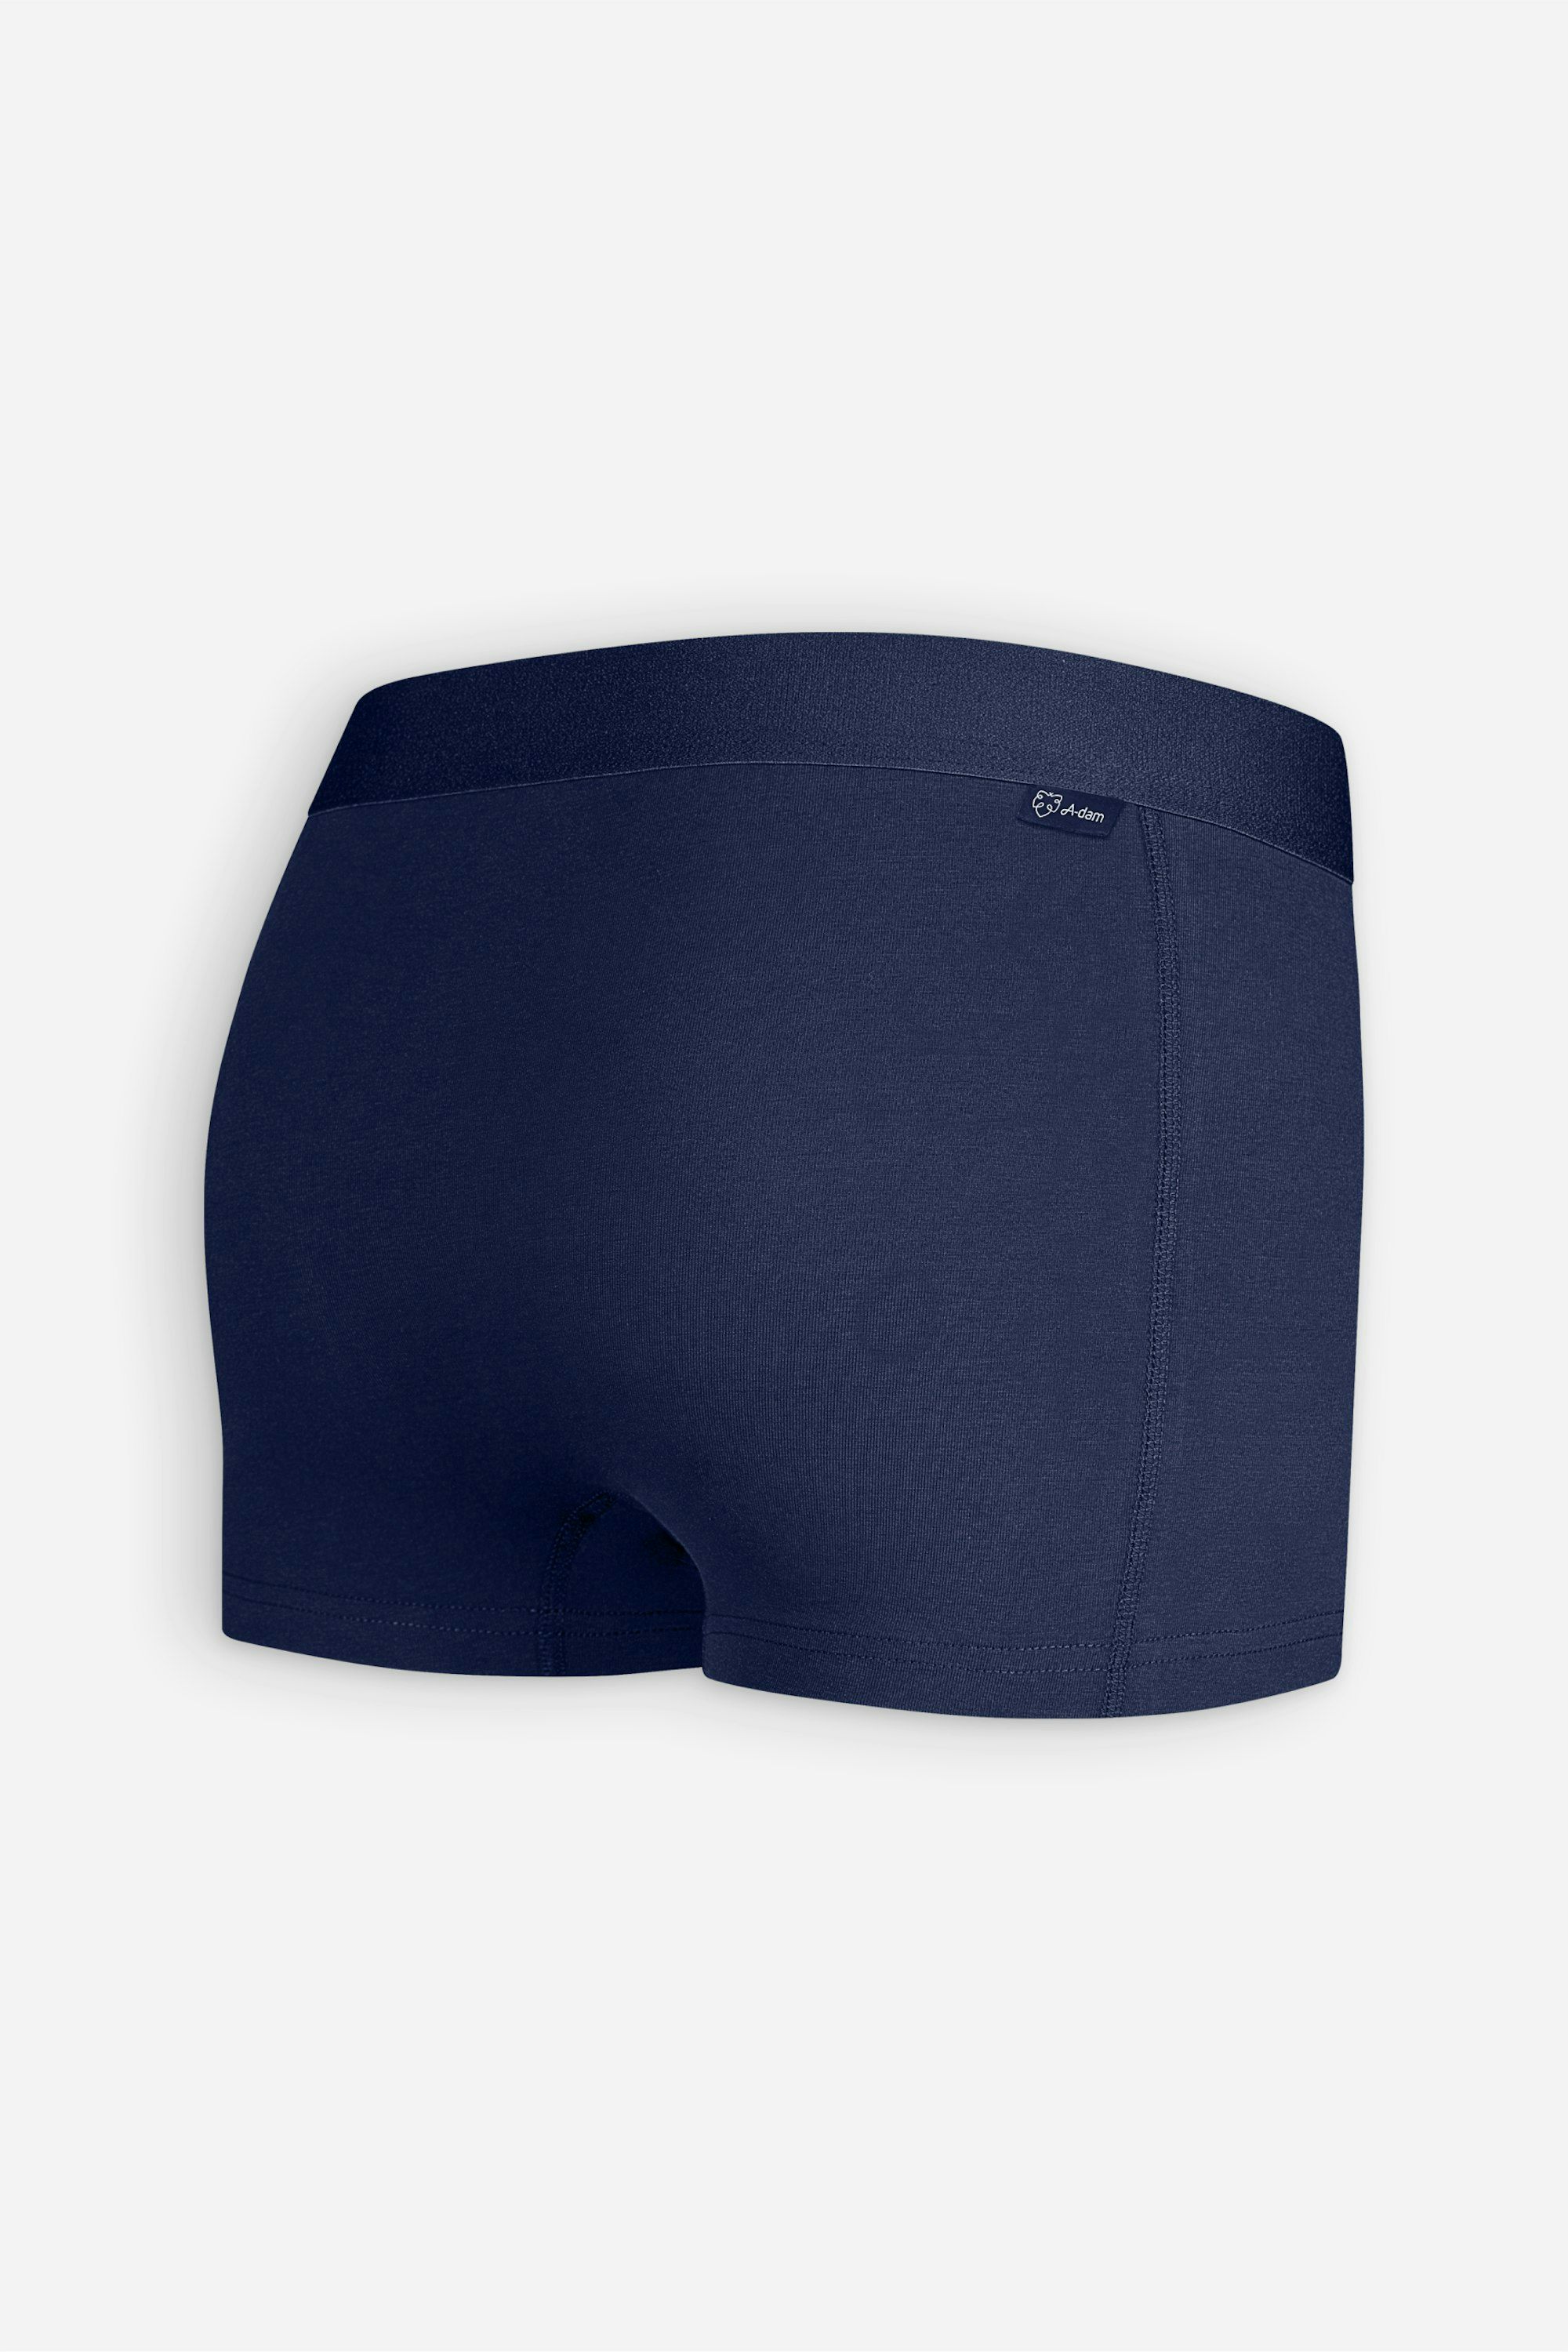 3xSolid Navy Trunks